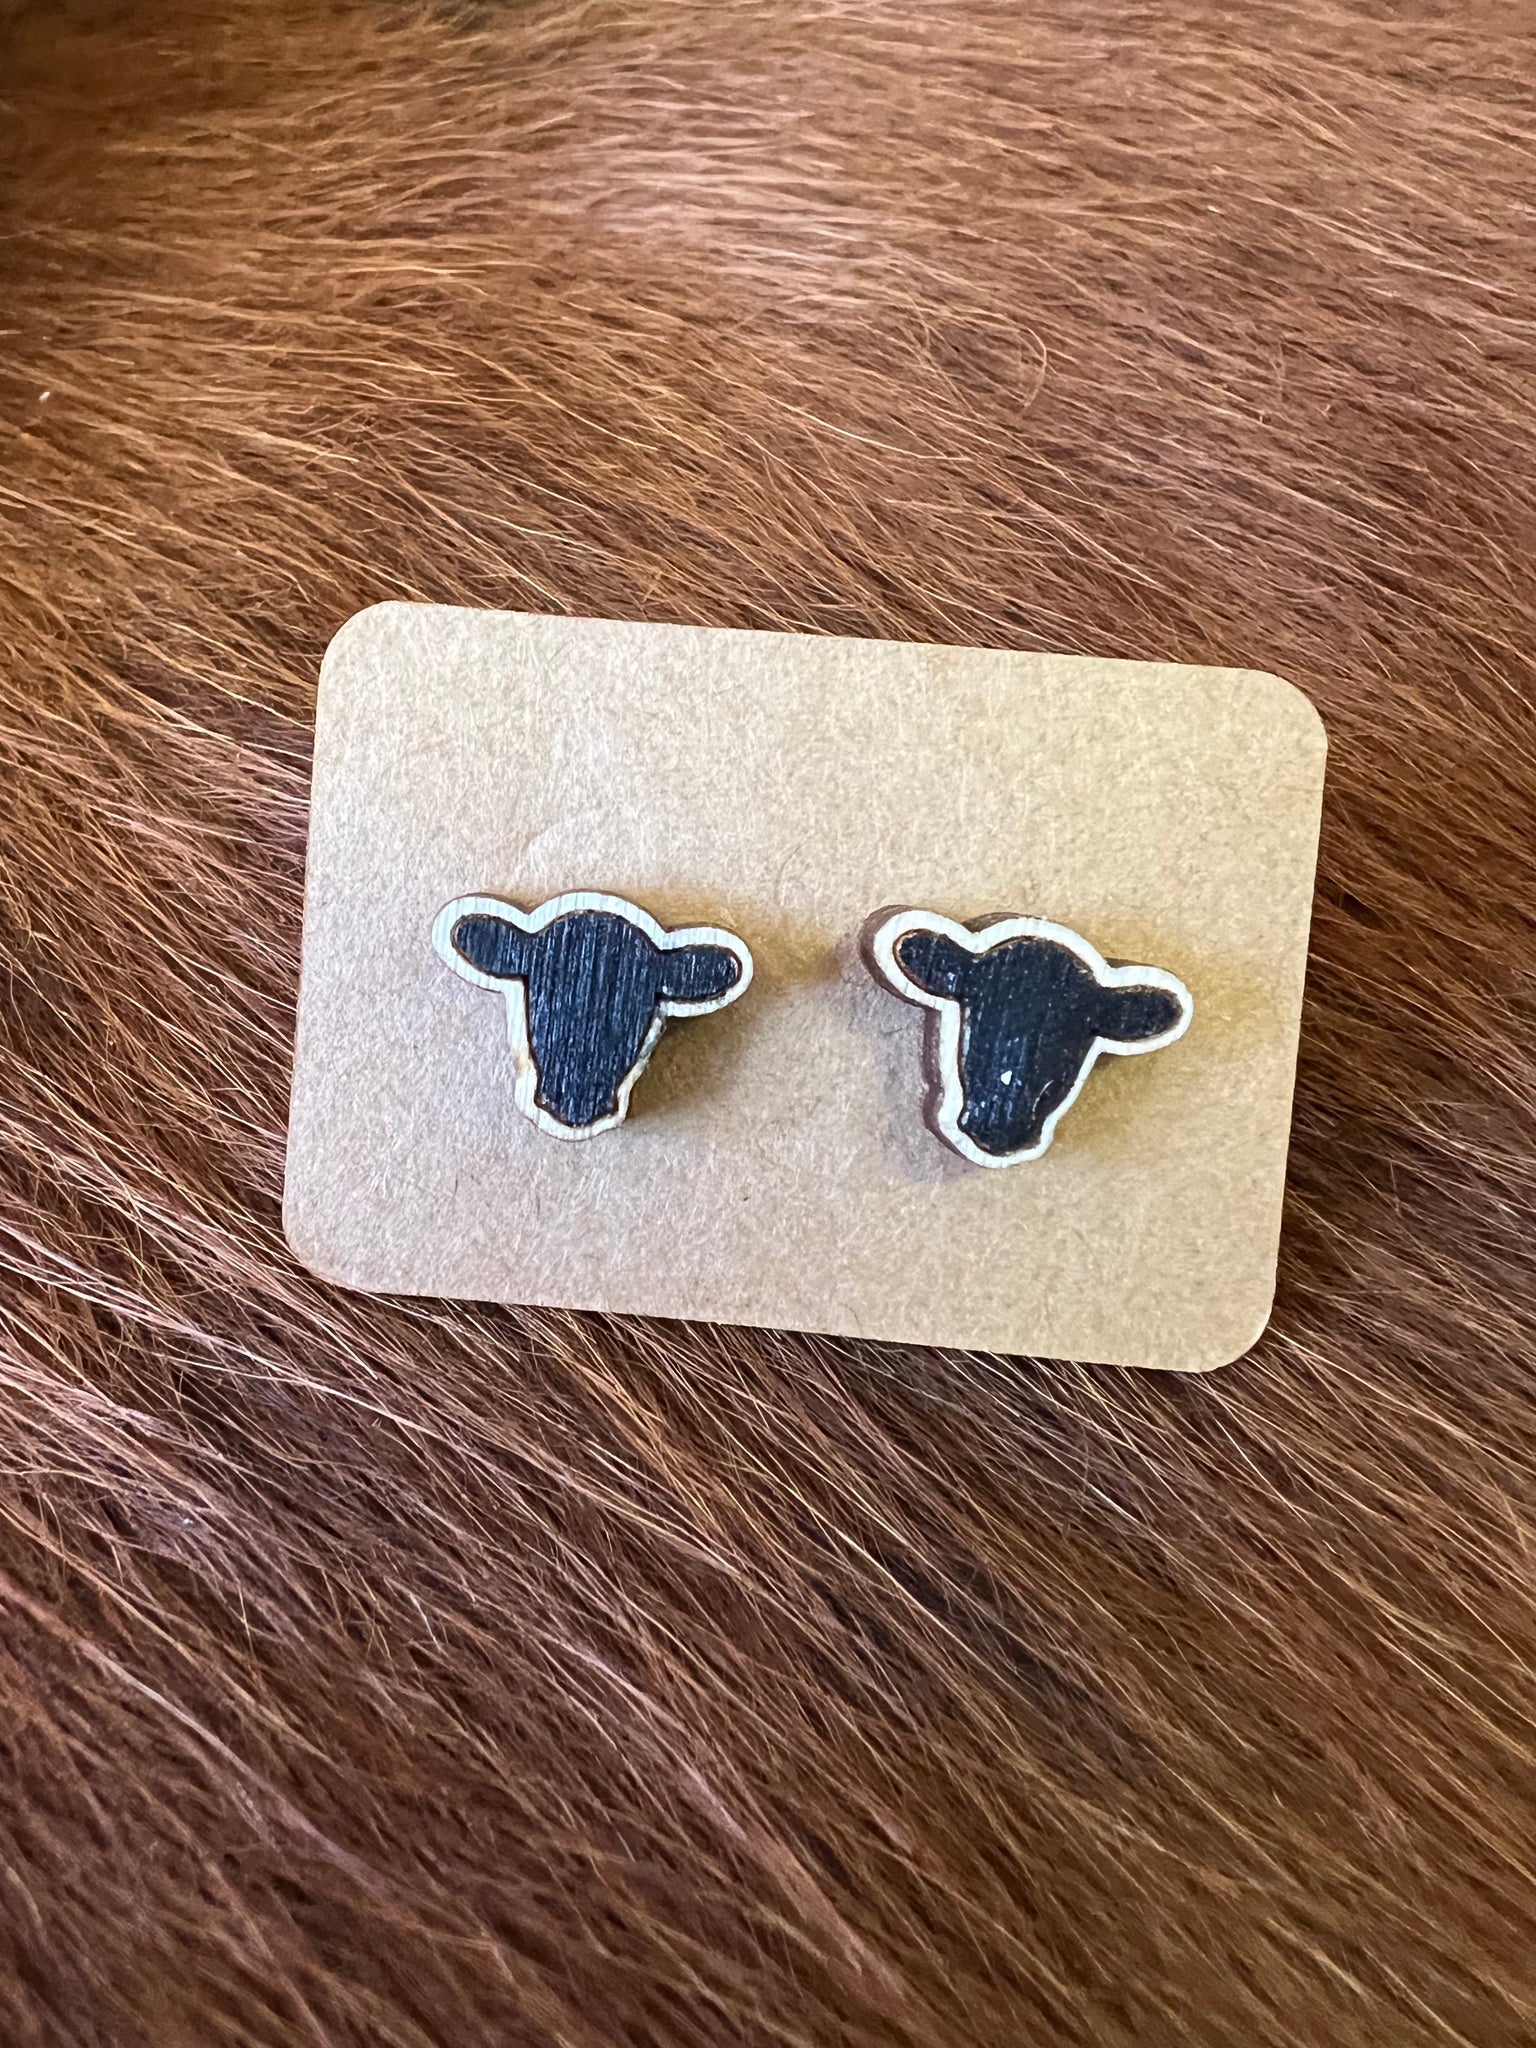 Lost Canyon Designs: Steer Head Studs